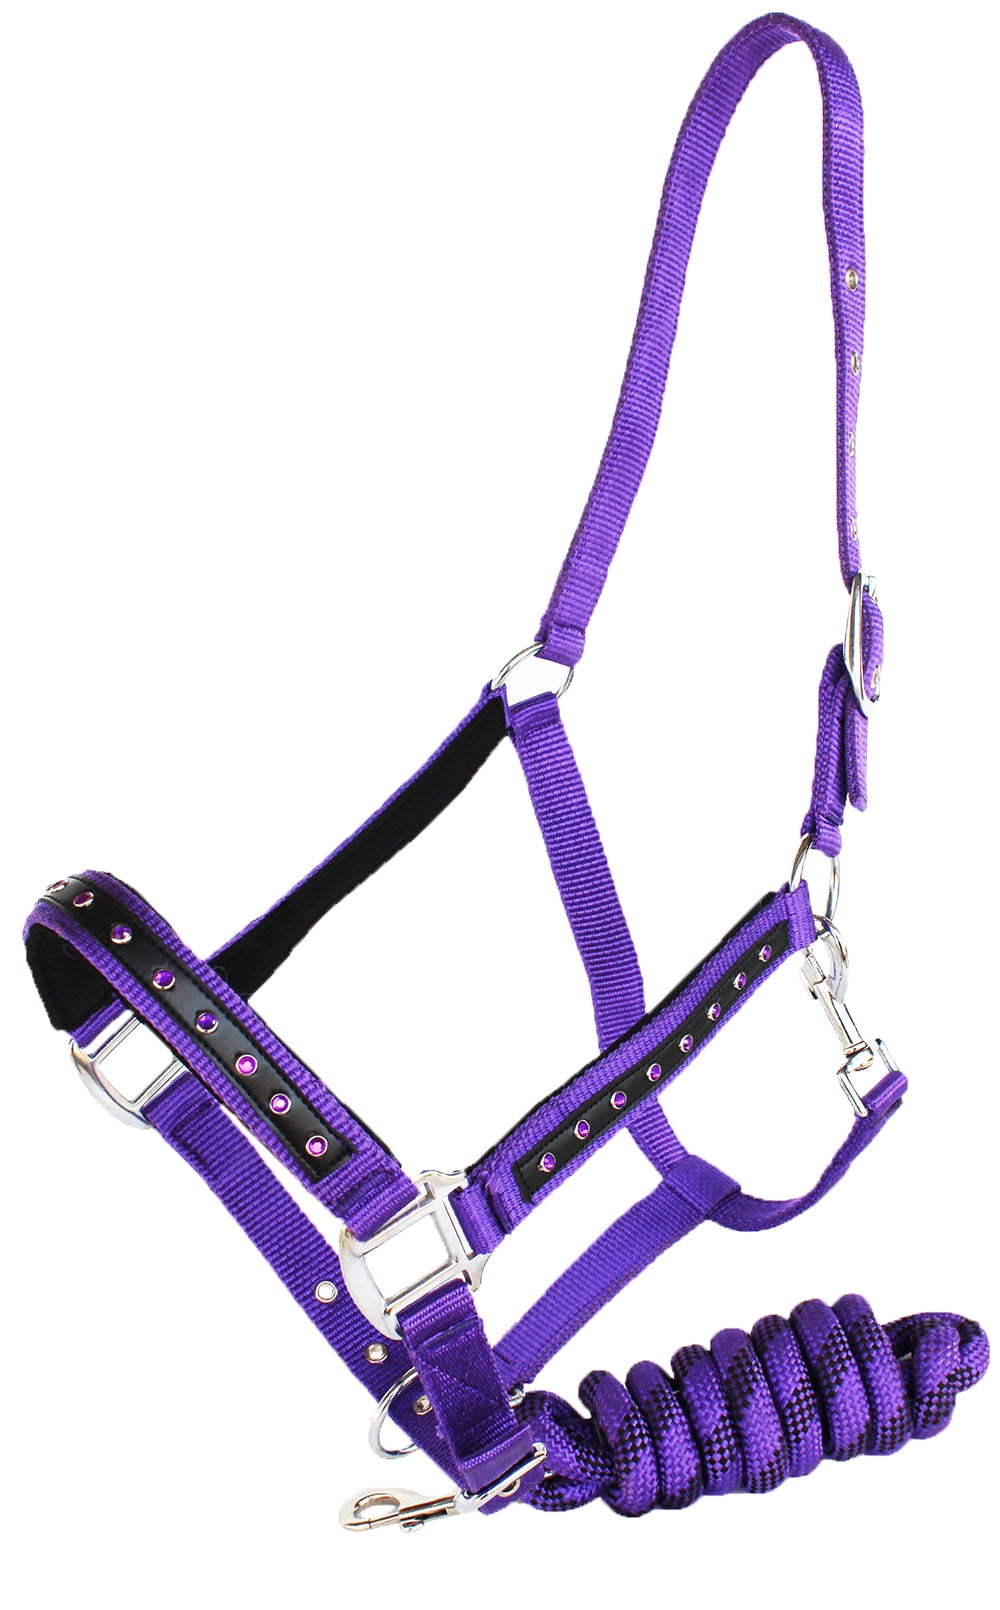 Showman PURPLE Nylon Halter w/ Leather Accents & 8' Poly Lead! NEW HORSE TACK!! 